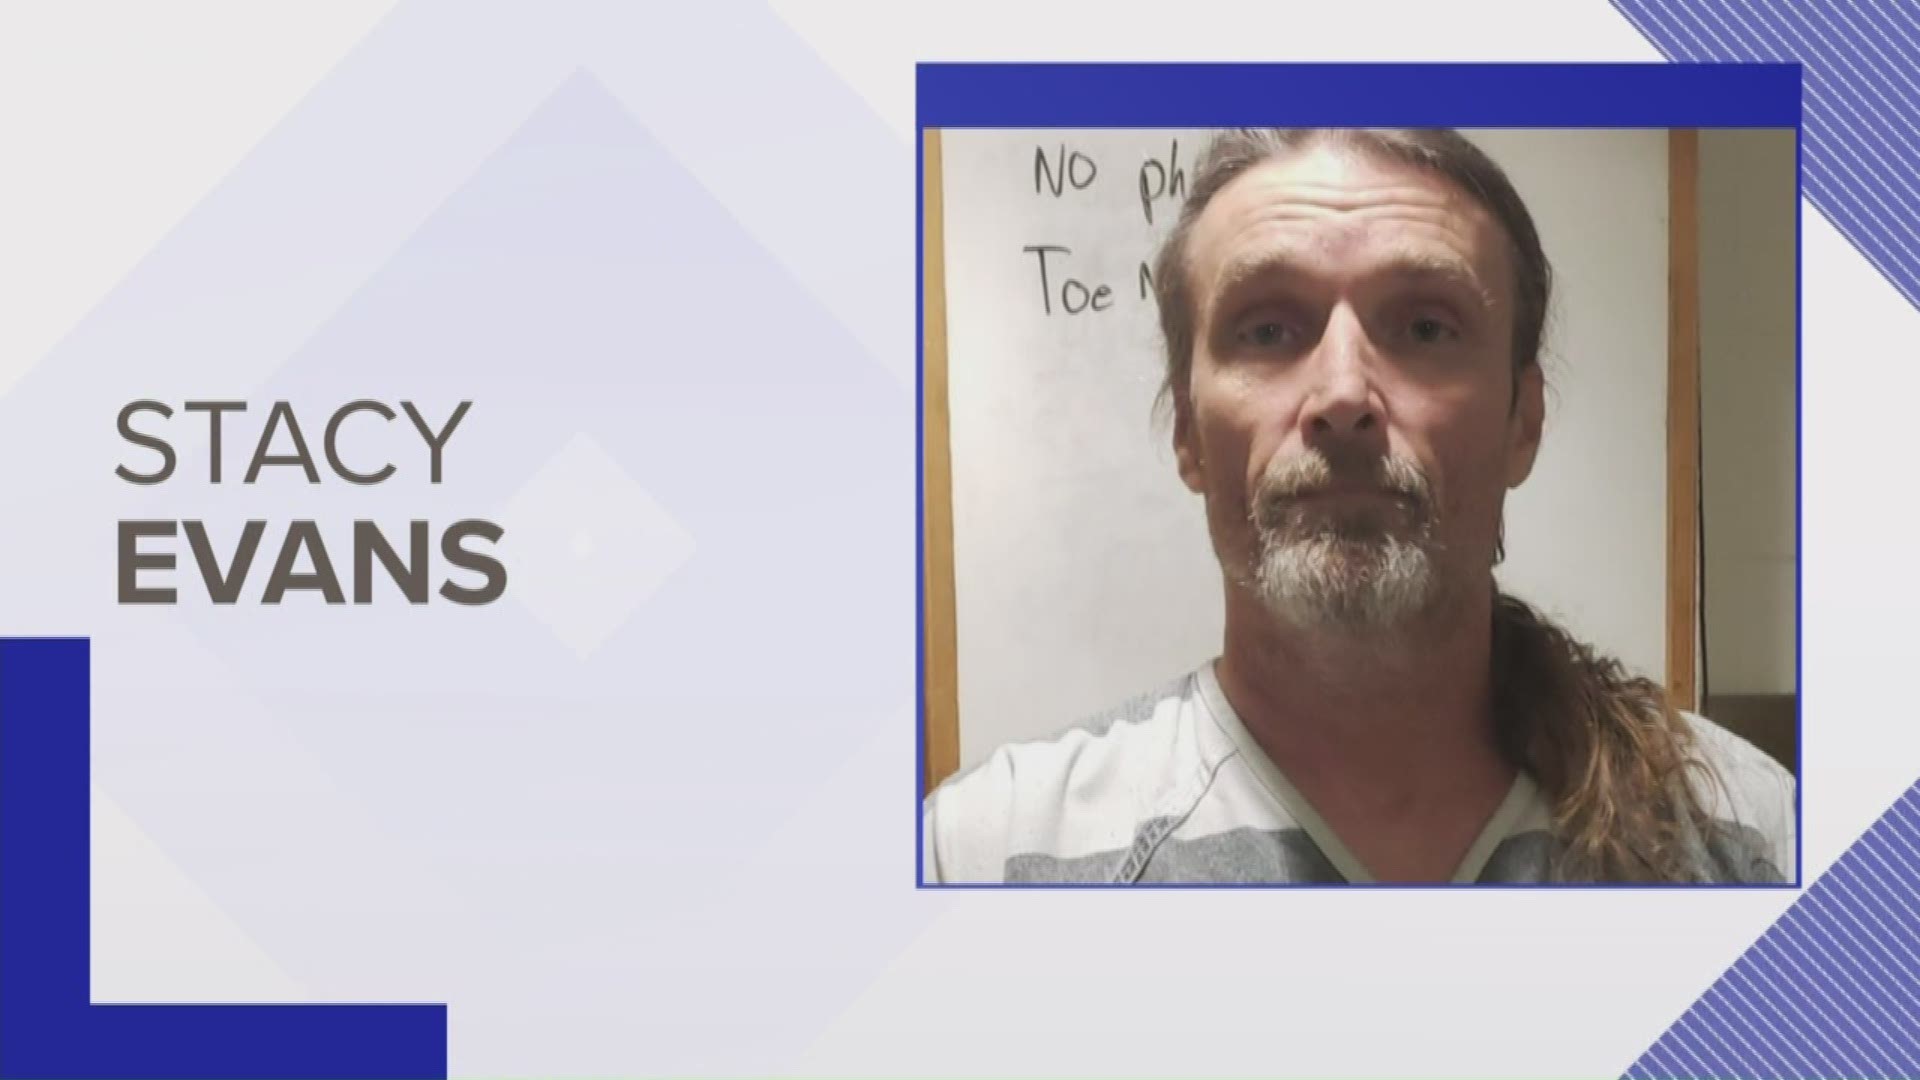 Police say Stacy Evans was wanted on numerous charges. He was arrested in Paoli, Indiana.